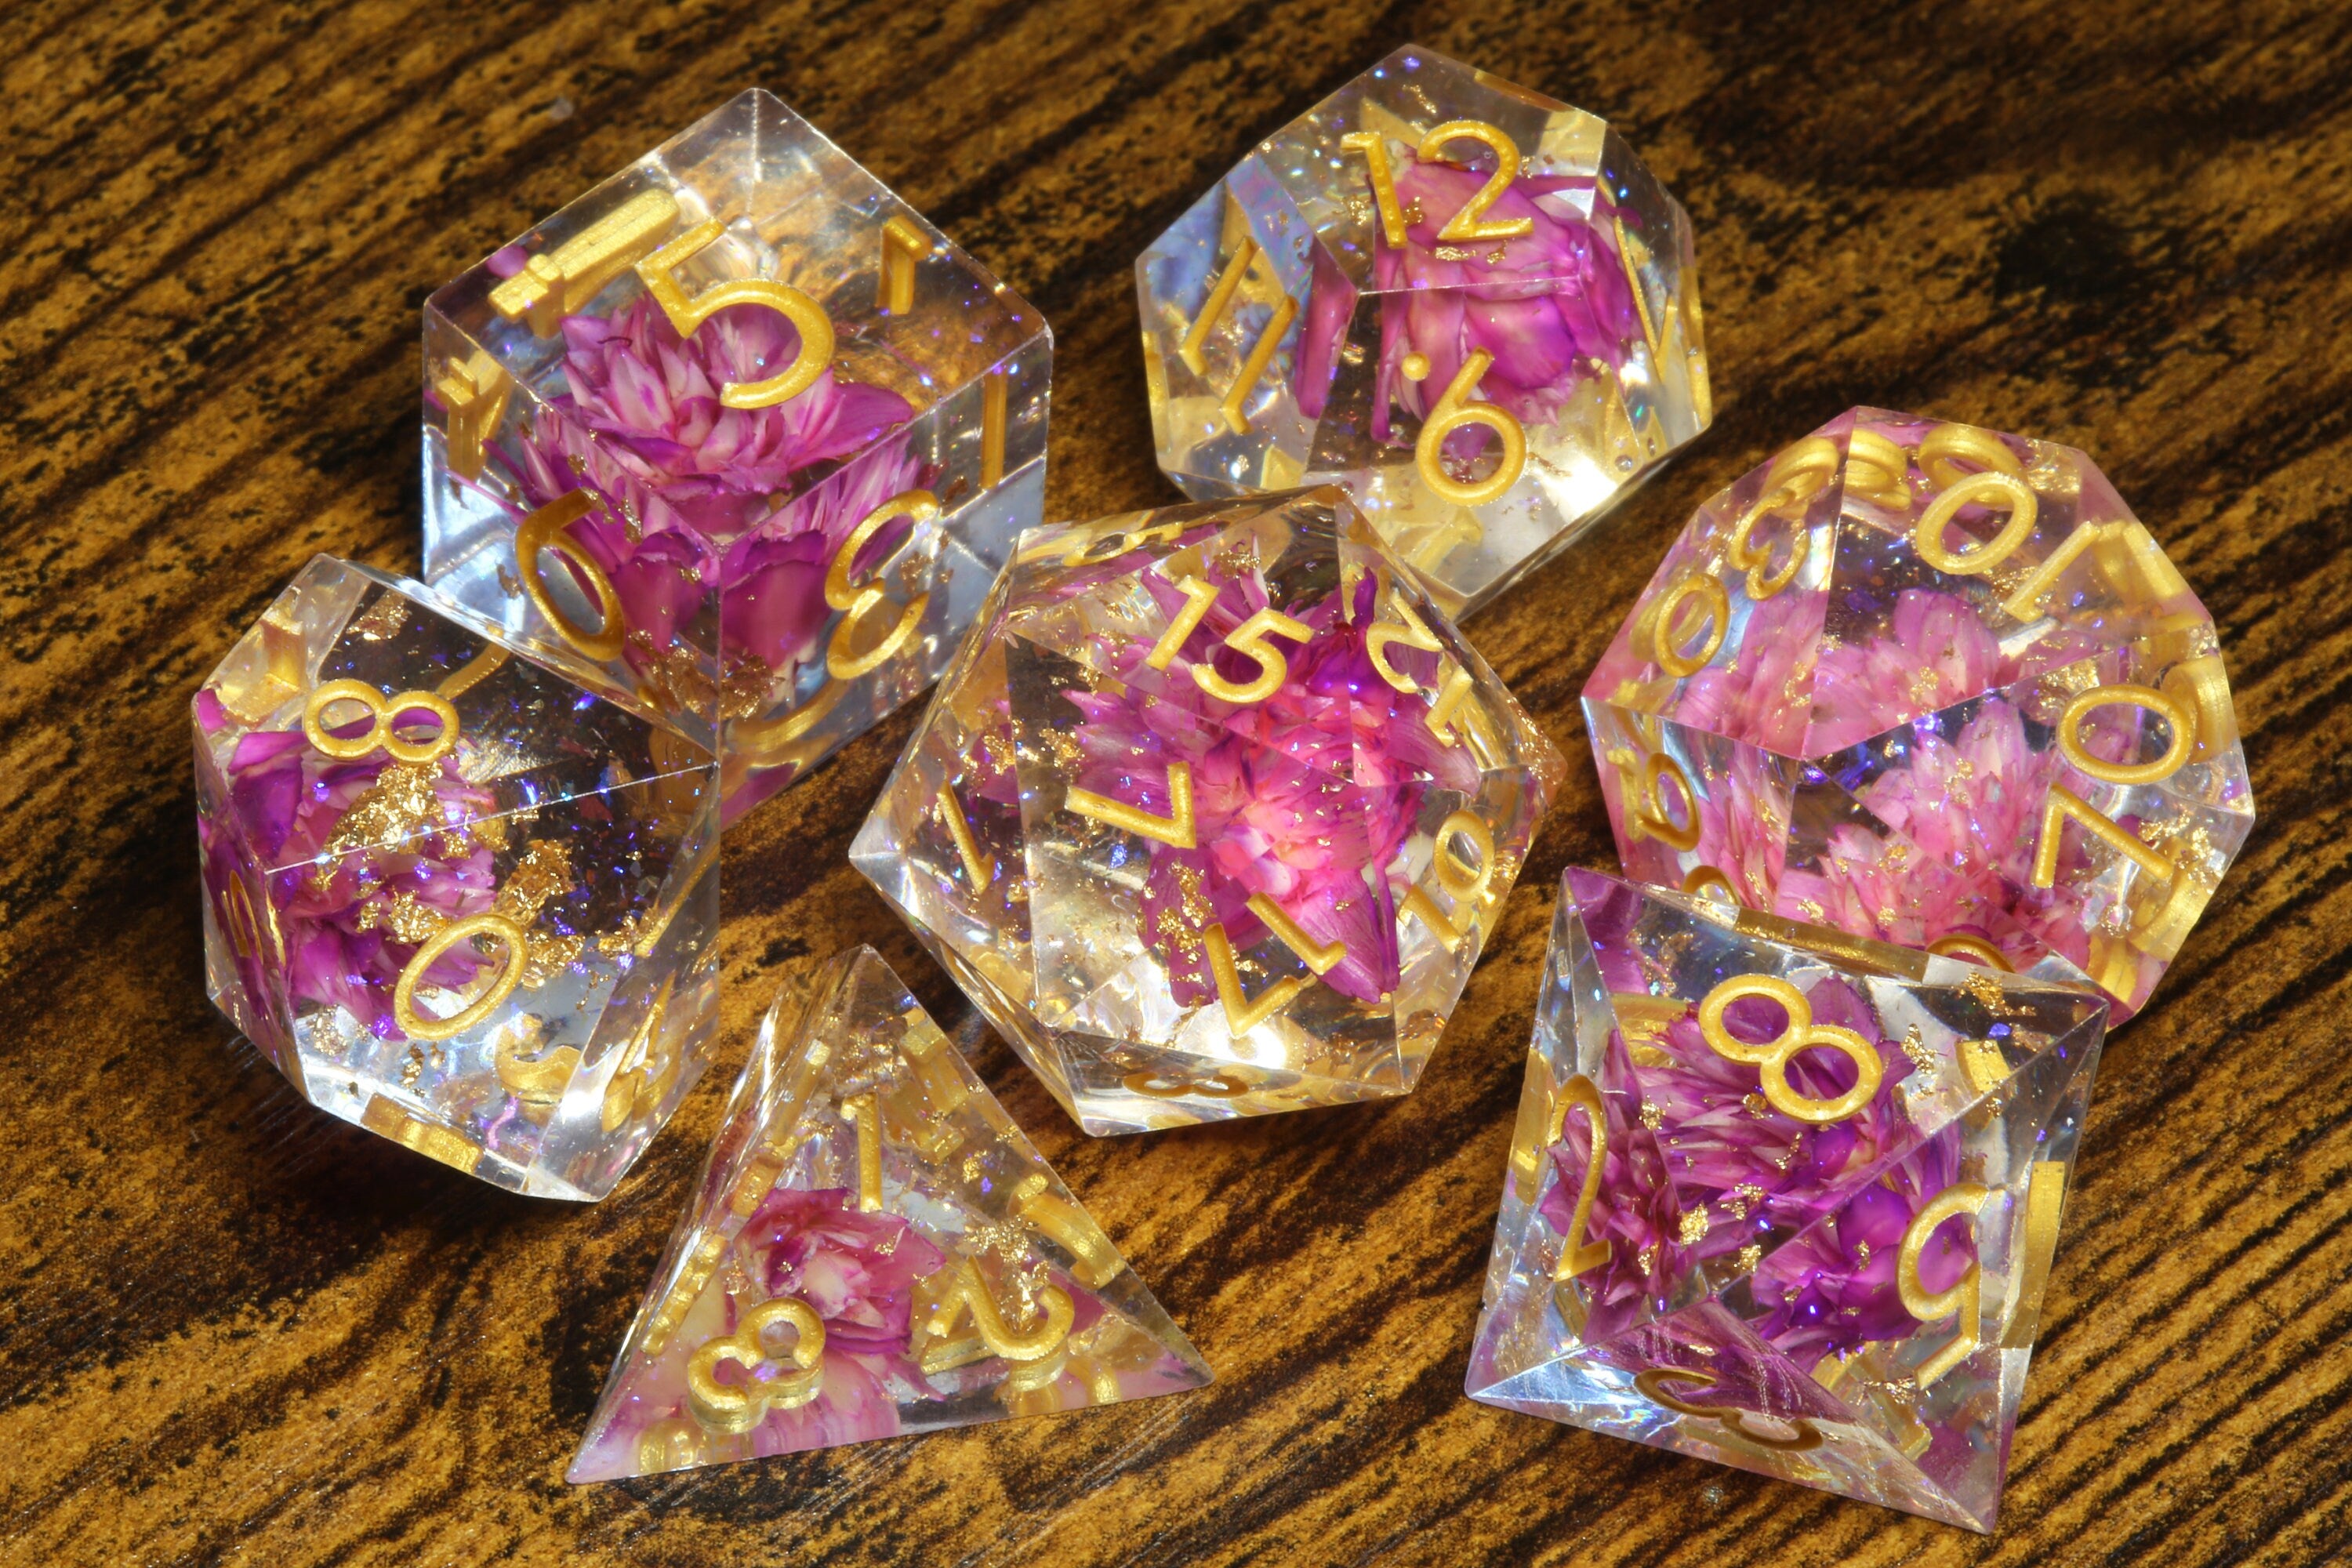 You're a critical hit to my heart dice box and fuchsia pink flowers sharp edge dice set